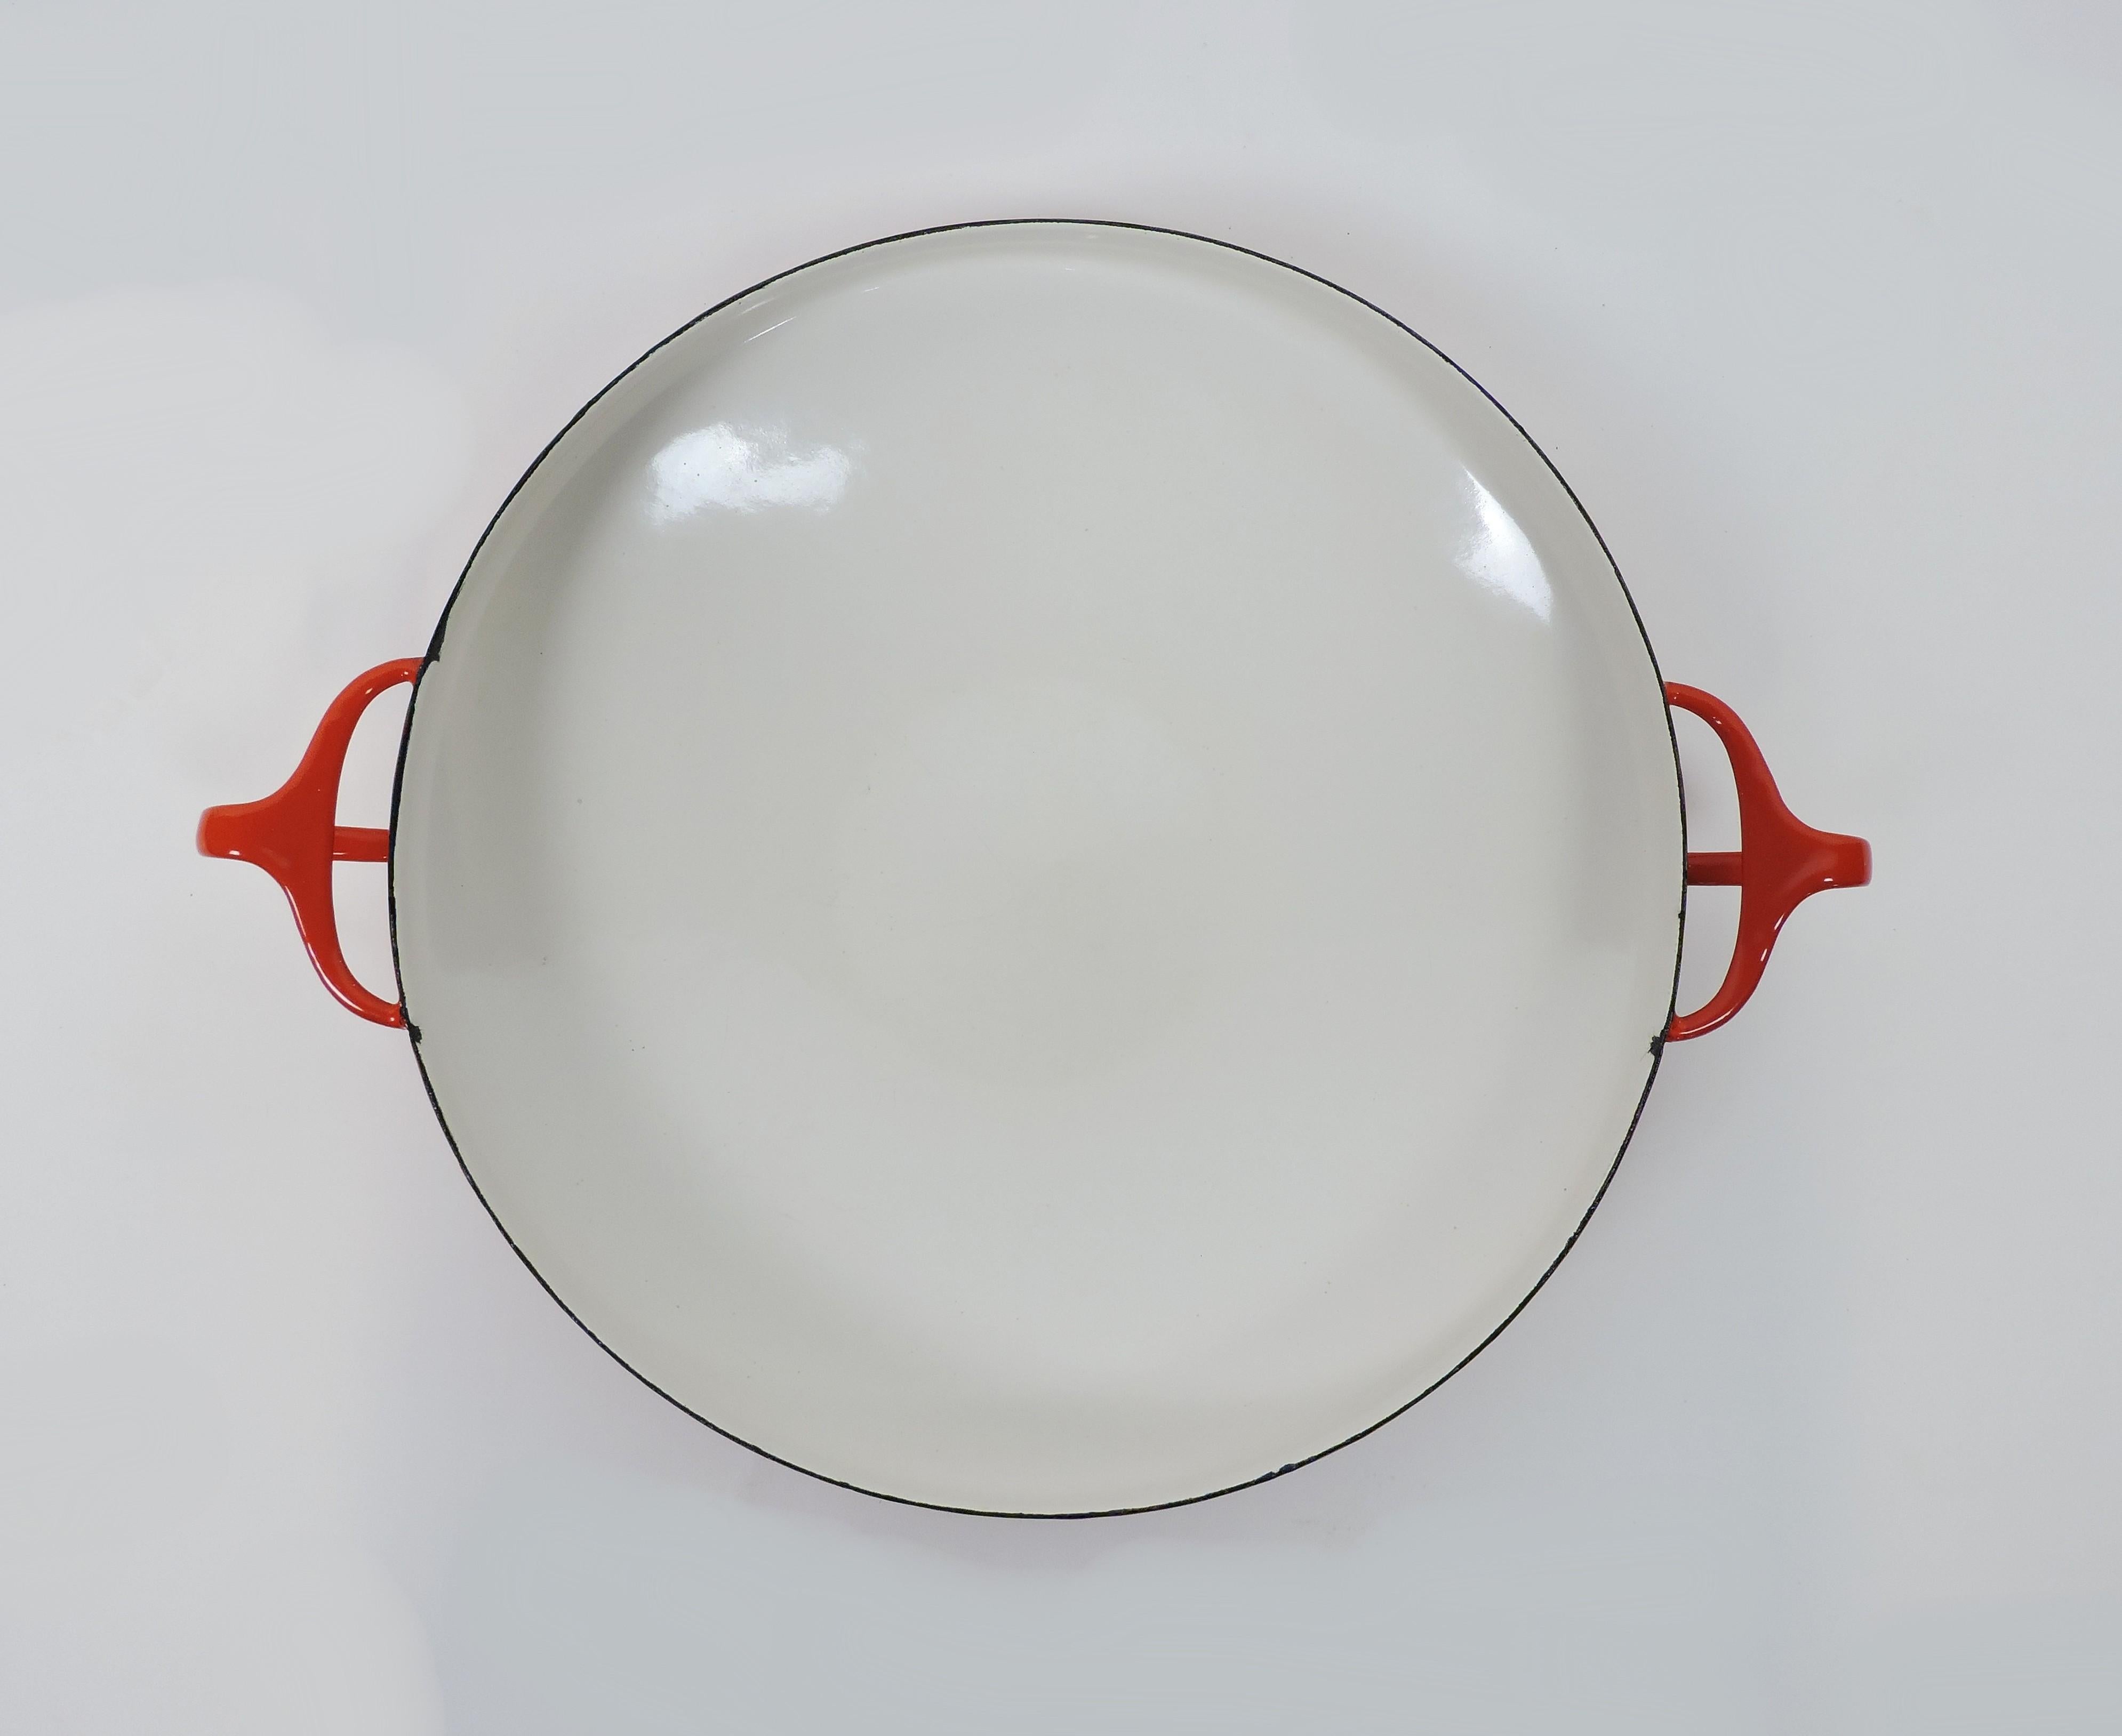 Beautiful Dansk Kobenstyle bright red and white enamel on steel large size paella pan designed by Jens Quistgaard and made in Denmark by Dansk. Kobenstyle cookware was introduced in 1955, and the logo on the bottom dates this pan to the